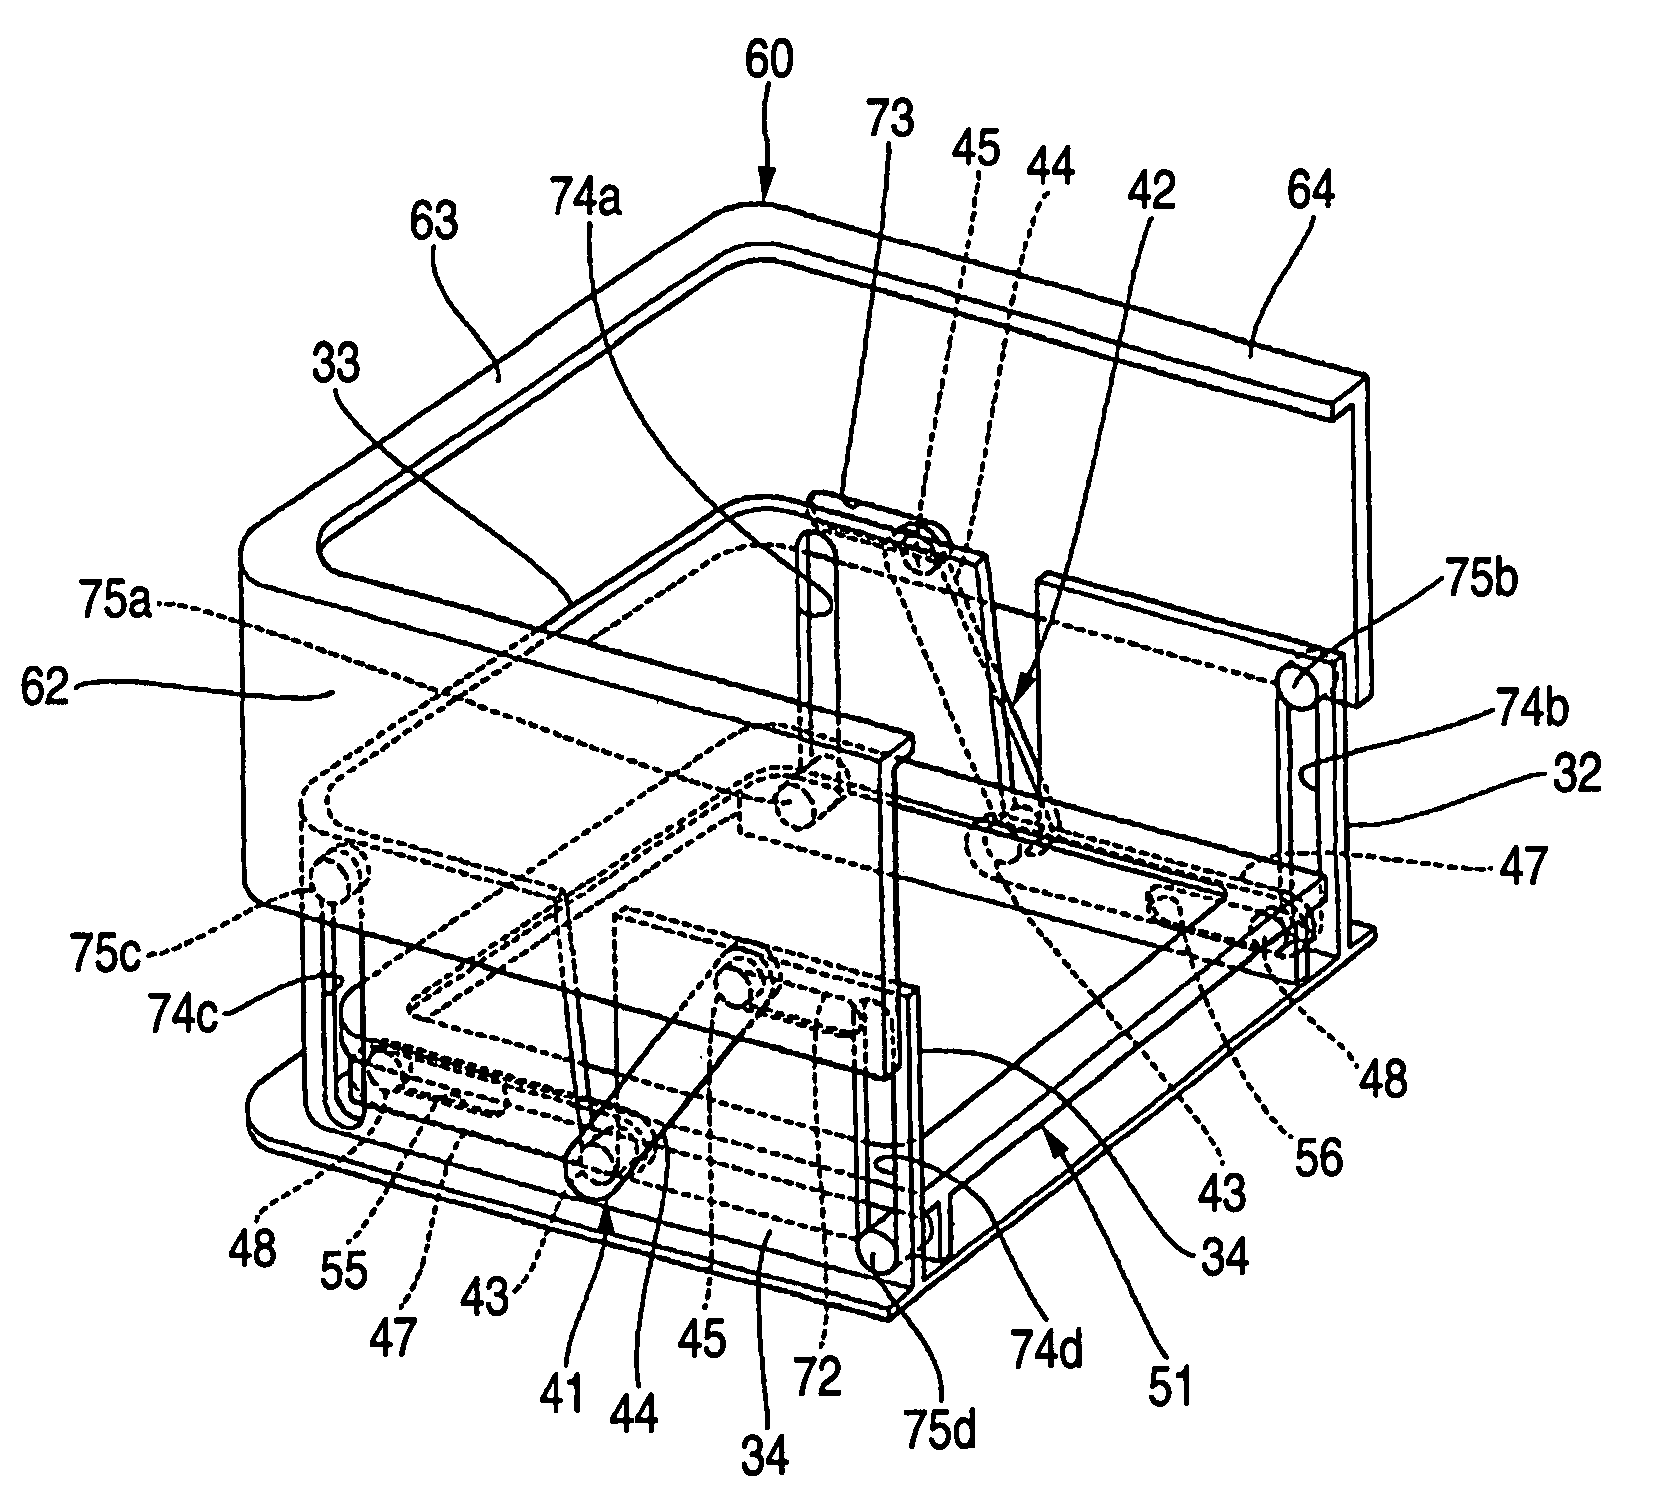 Automotive container holding apparatus